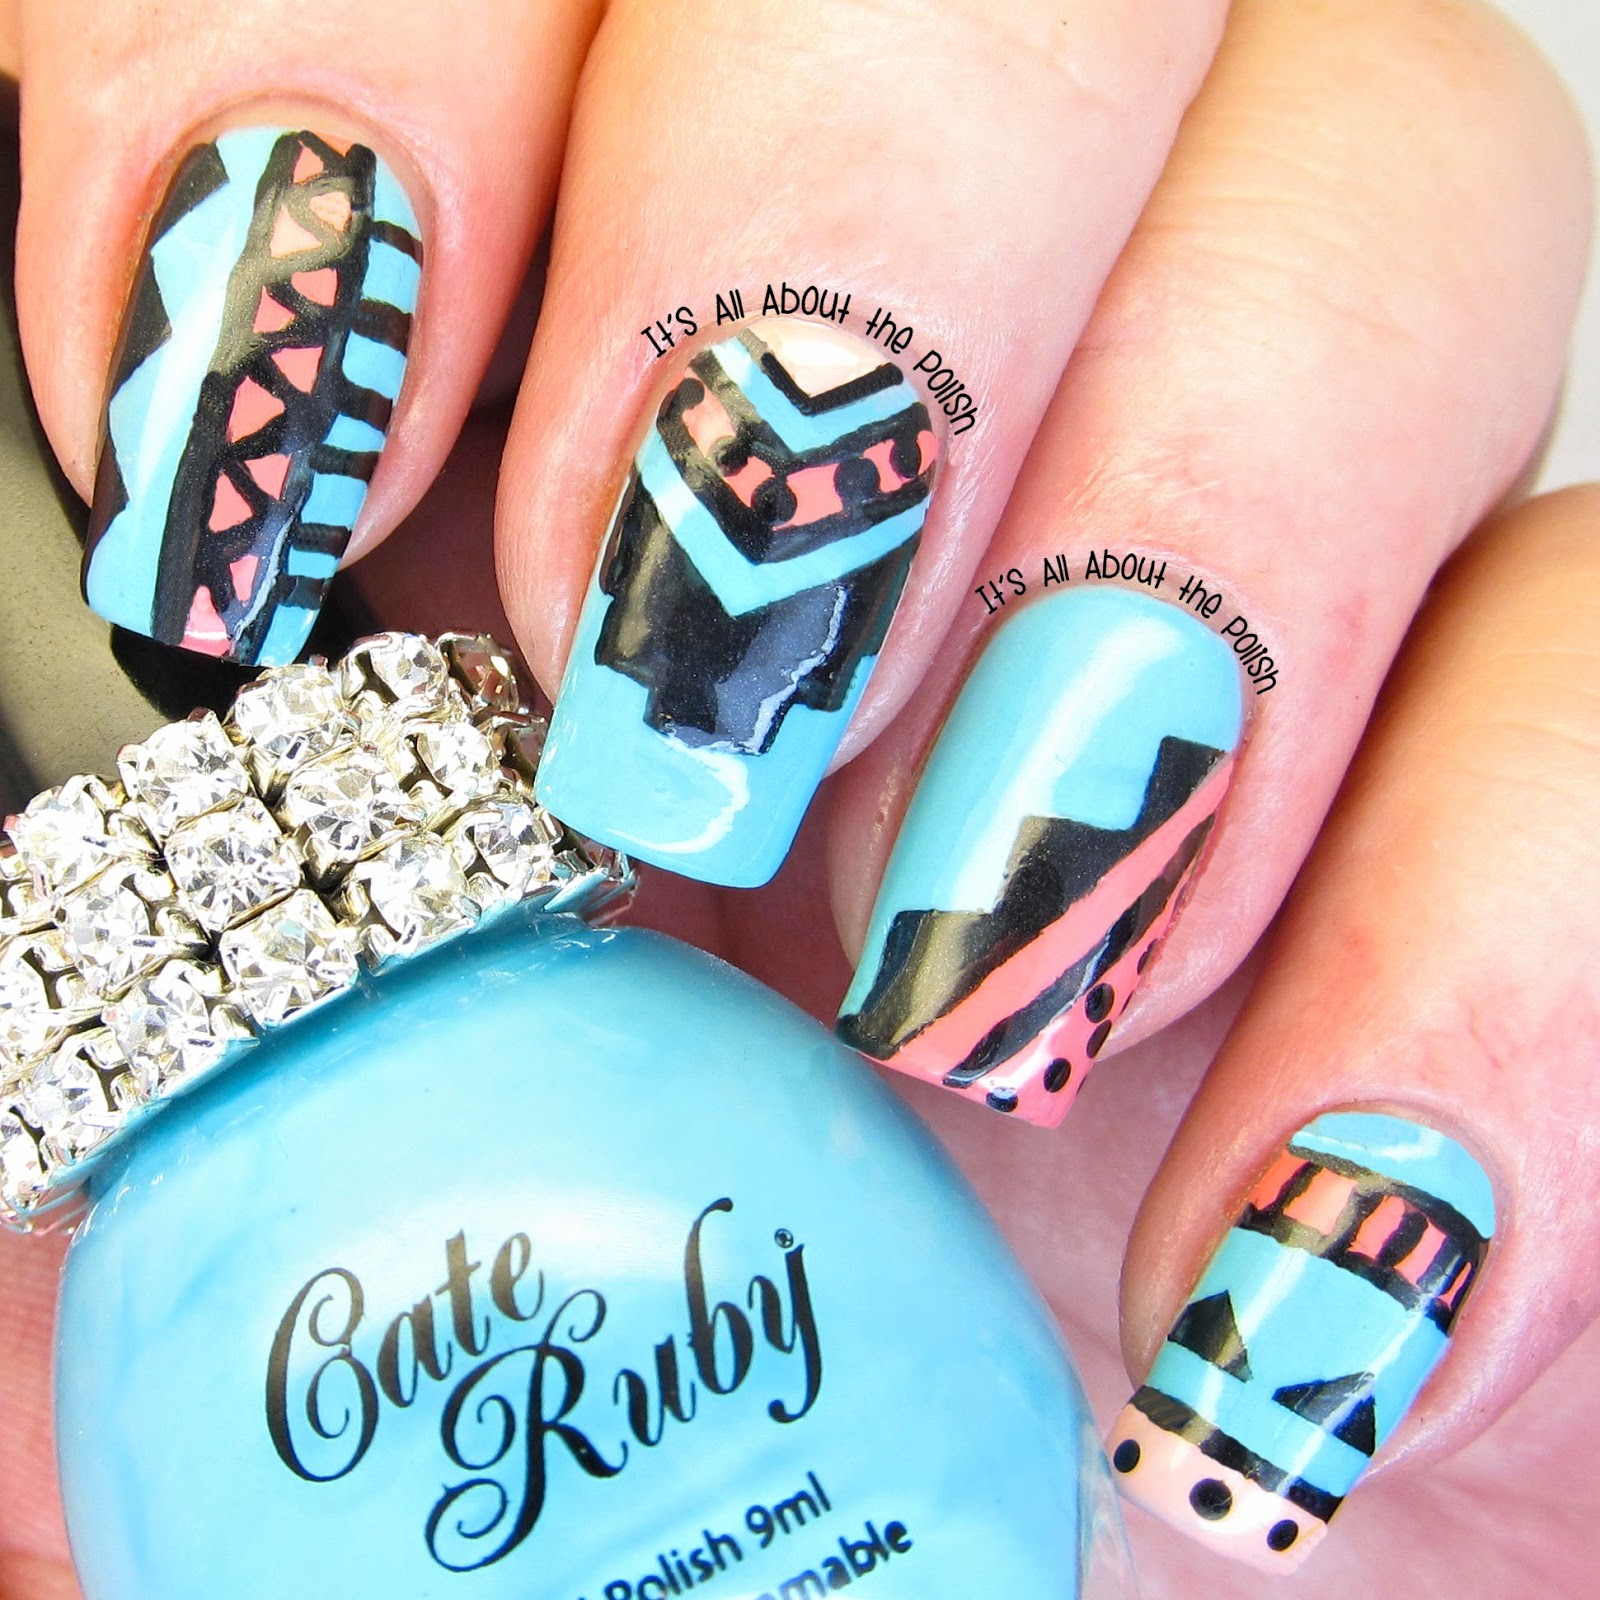 It's all about the polish: AN Monday - tribal print nail design